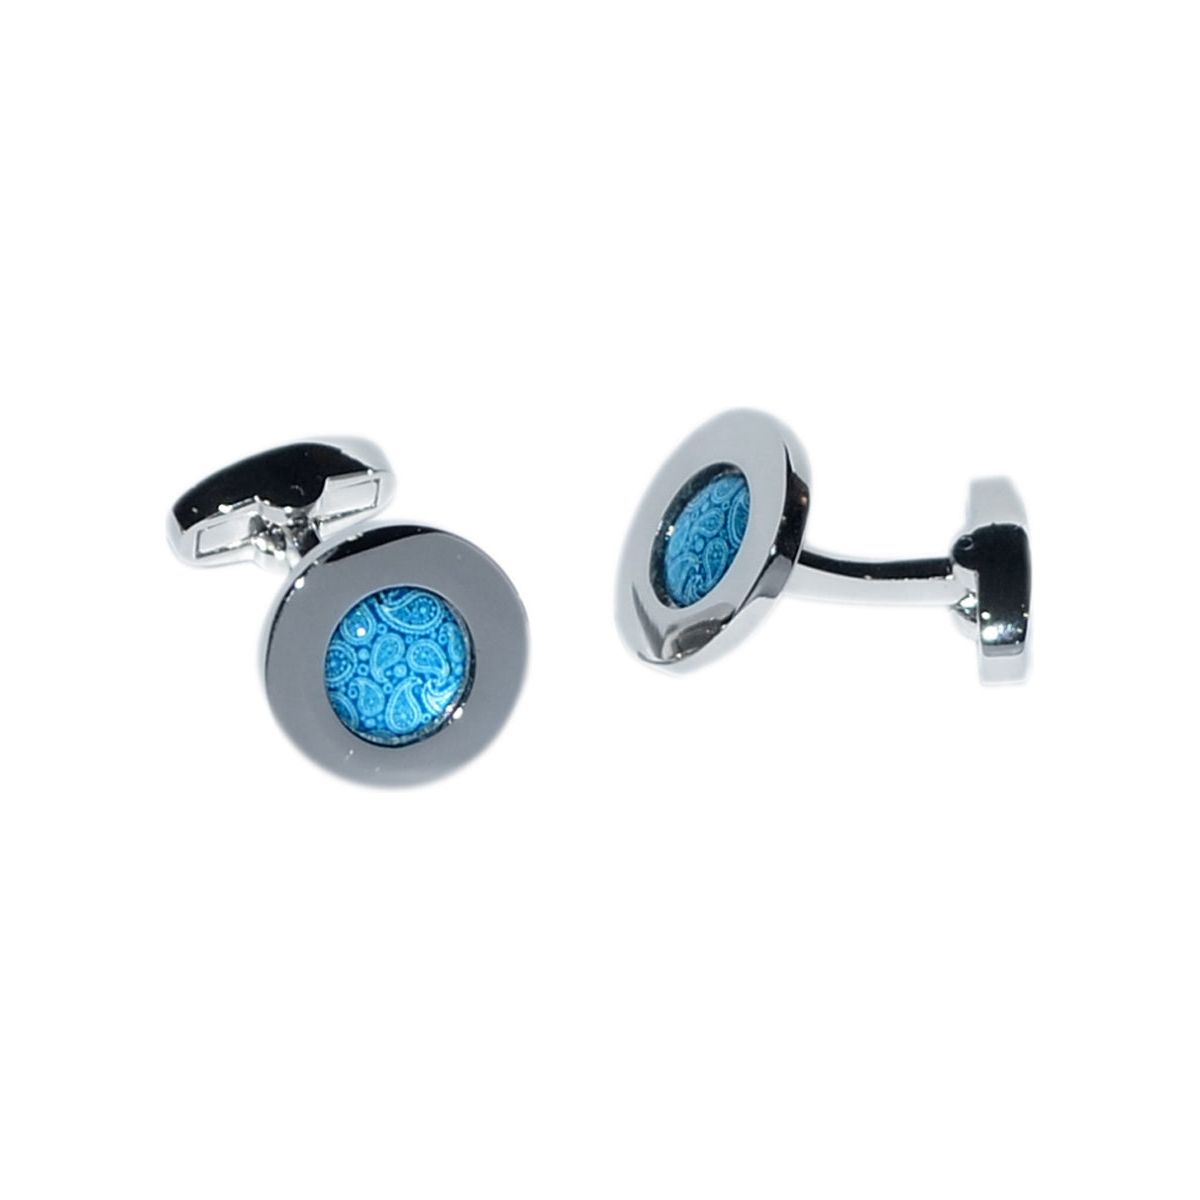 Teal Paisley Pattern Centred Cufflinks - Ashton and Finch